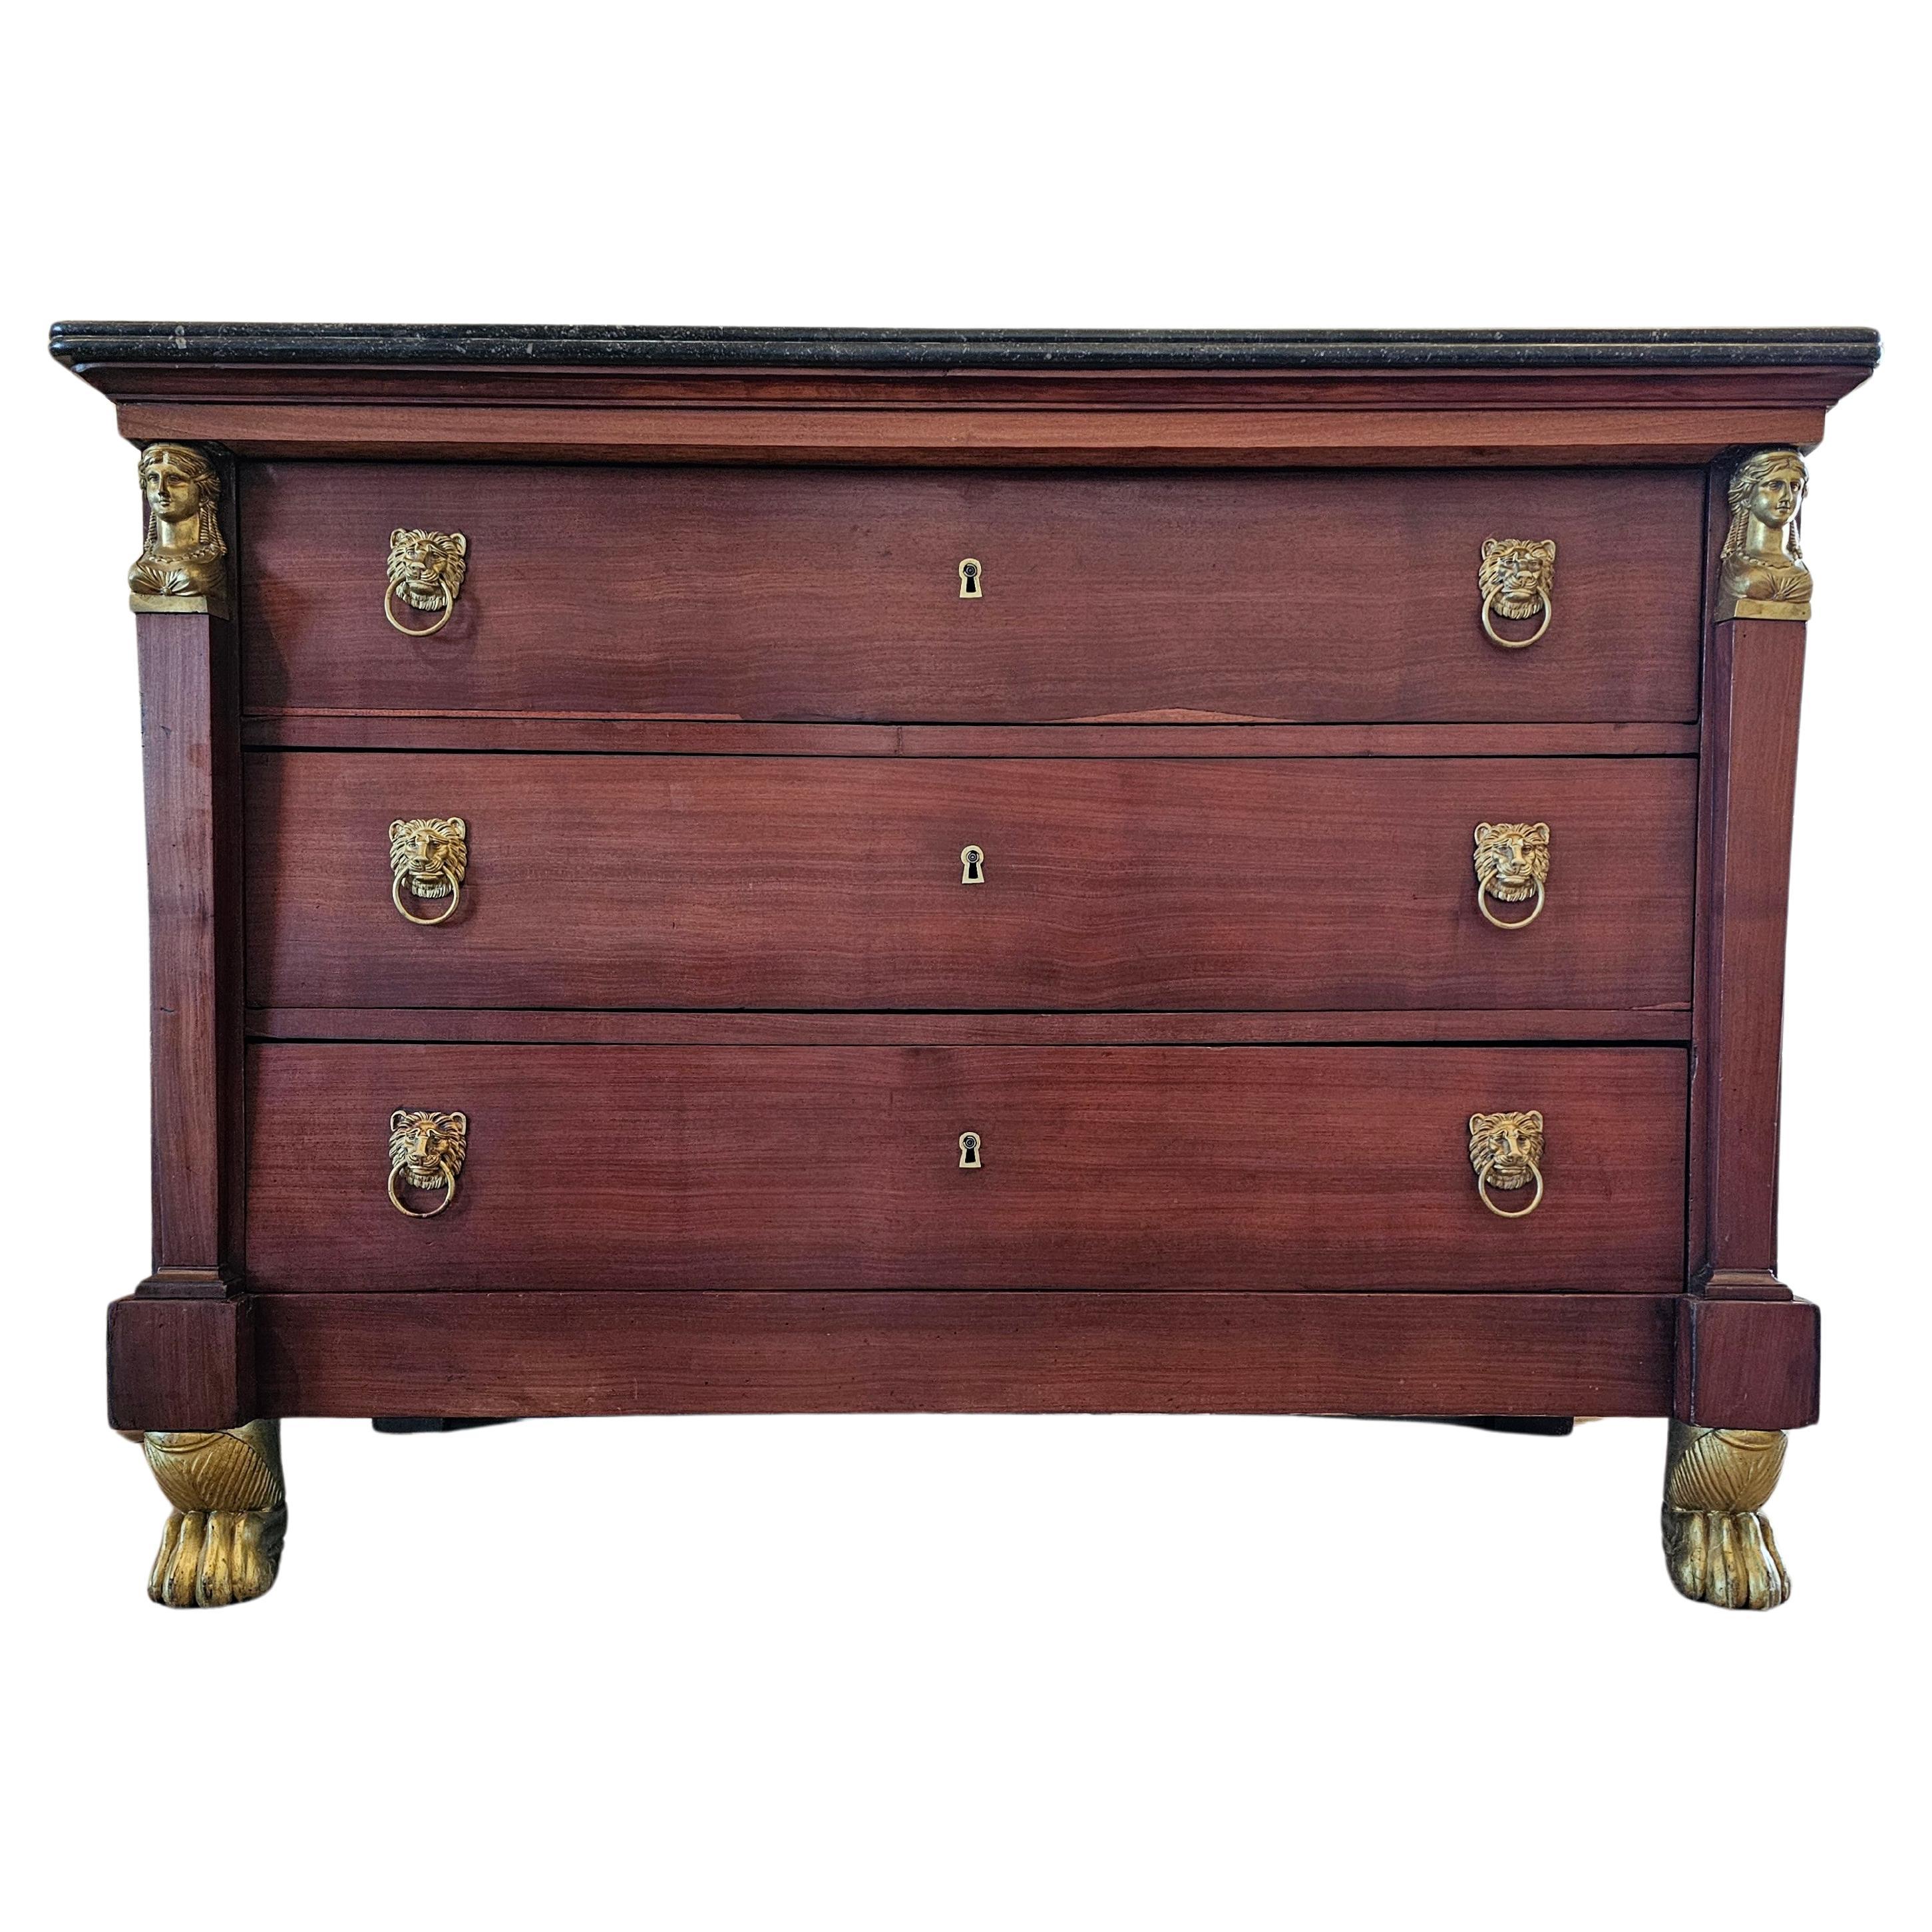 19th C. French Restoration Period Empire Style Mahogany Chest Of Drawers Commode